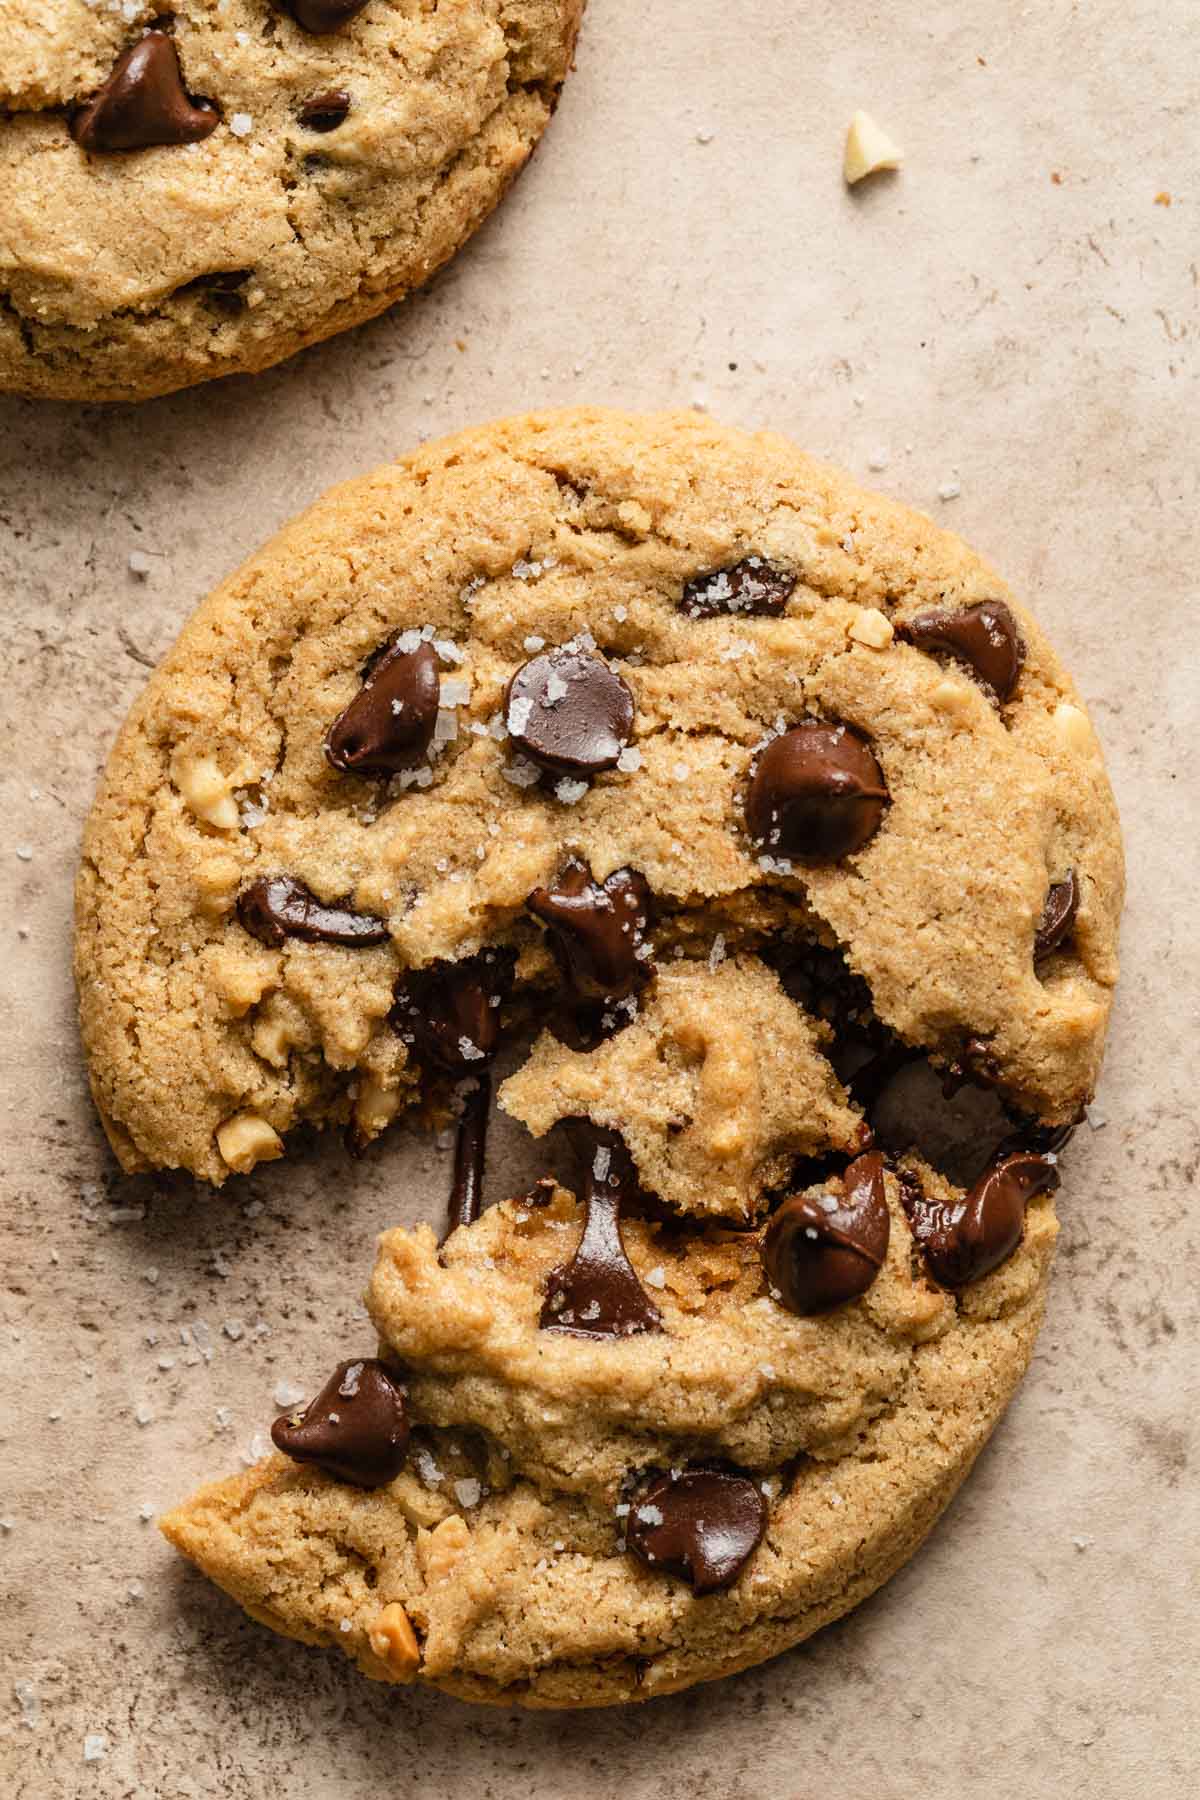 Close up view of a chocolate chip cookie pulled apart and showing the melted chocolate chips.